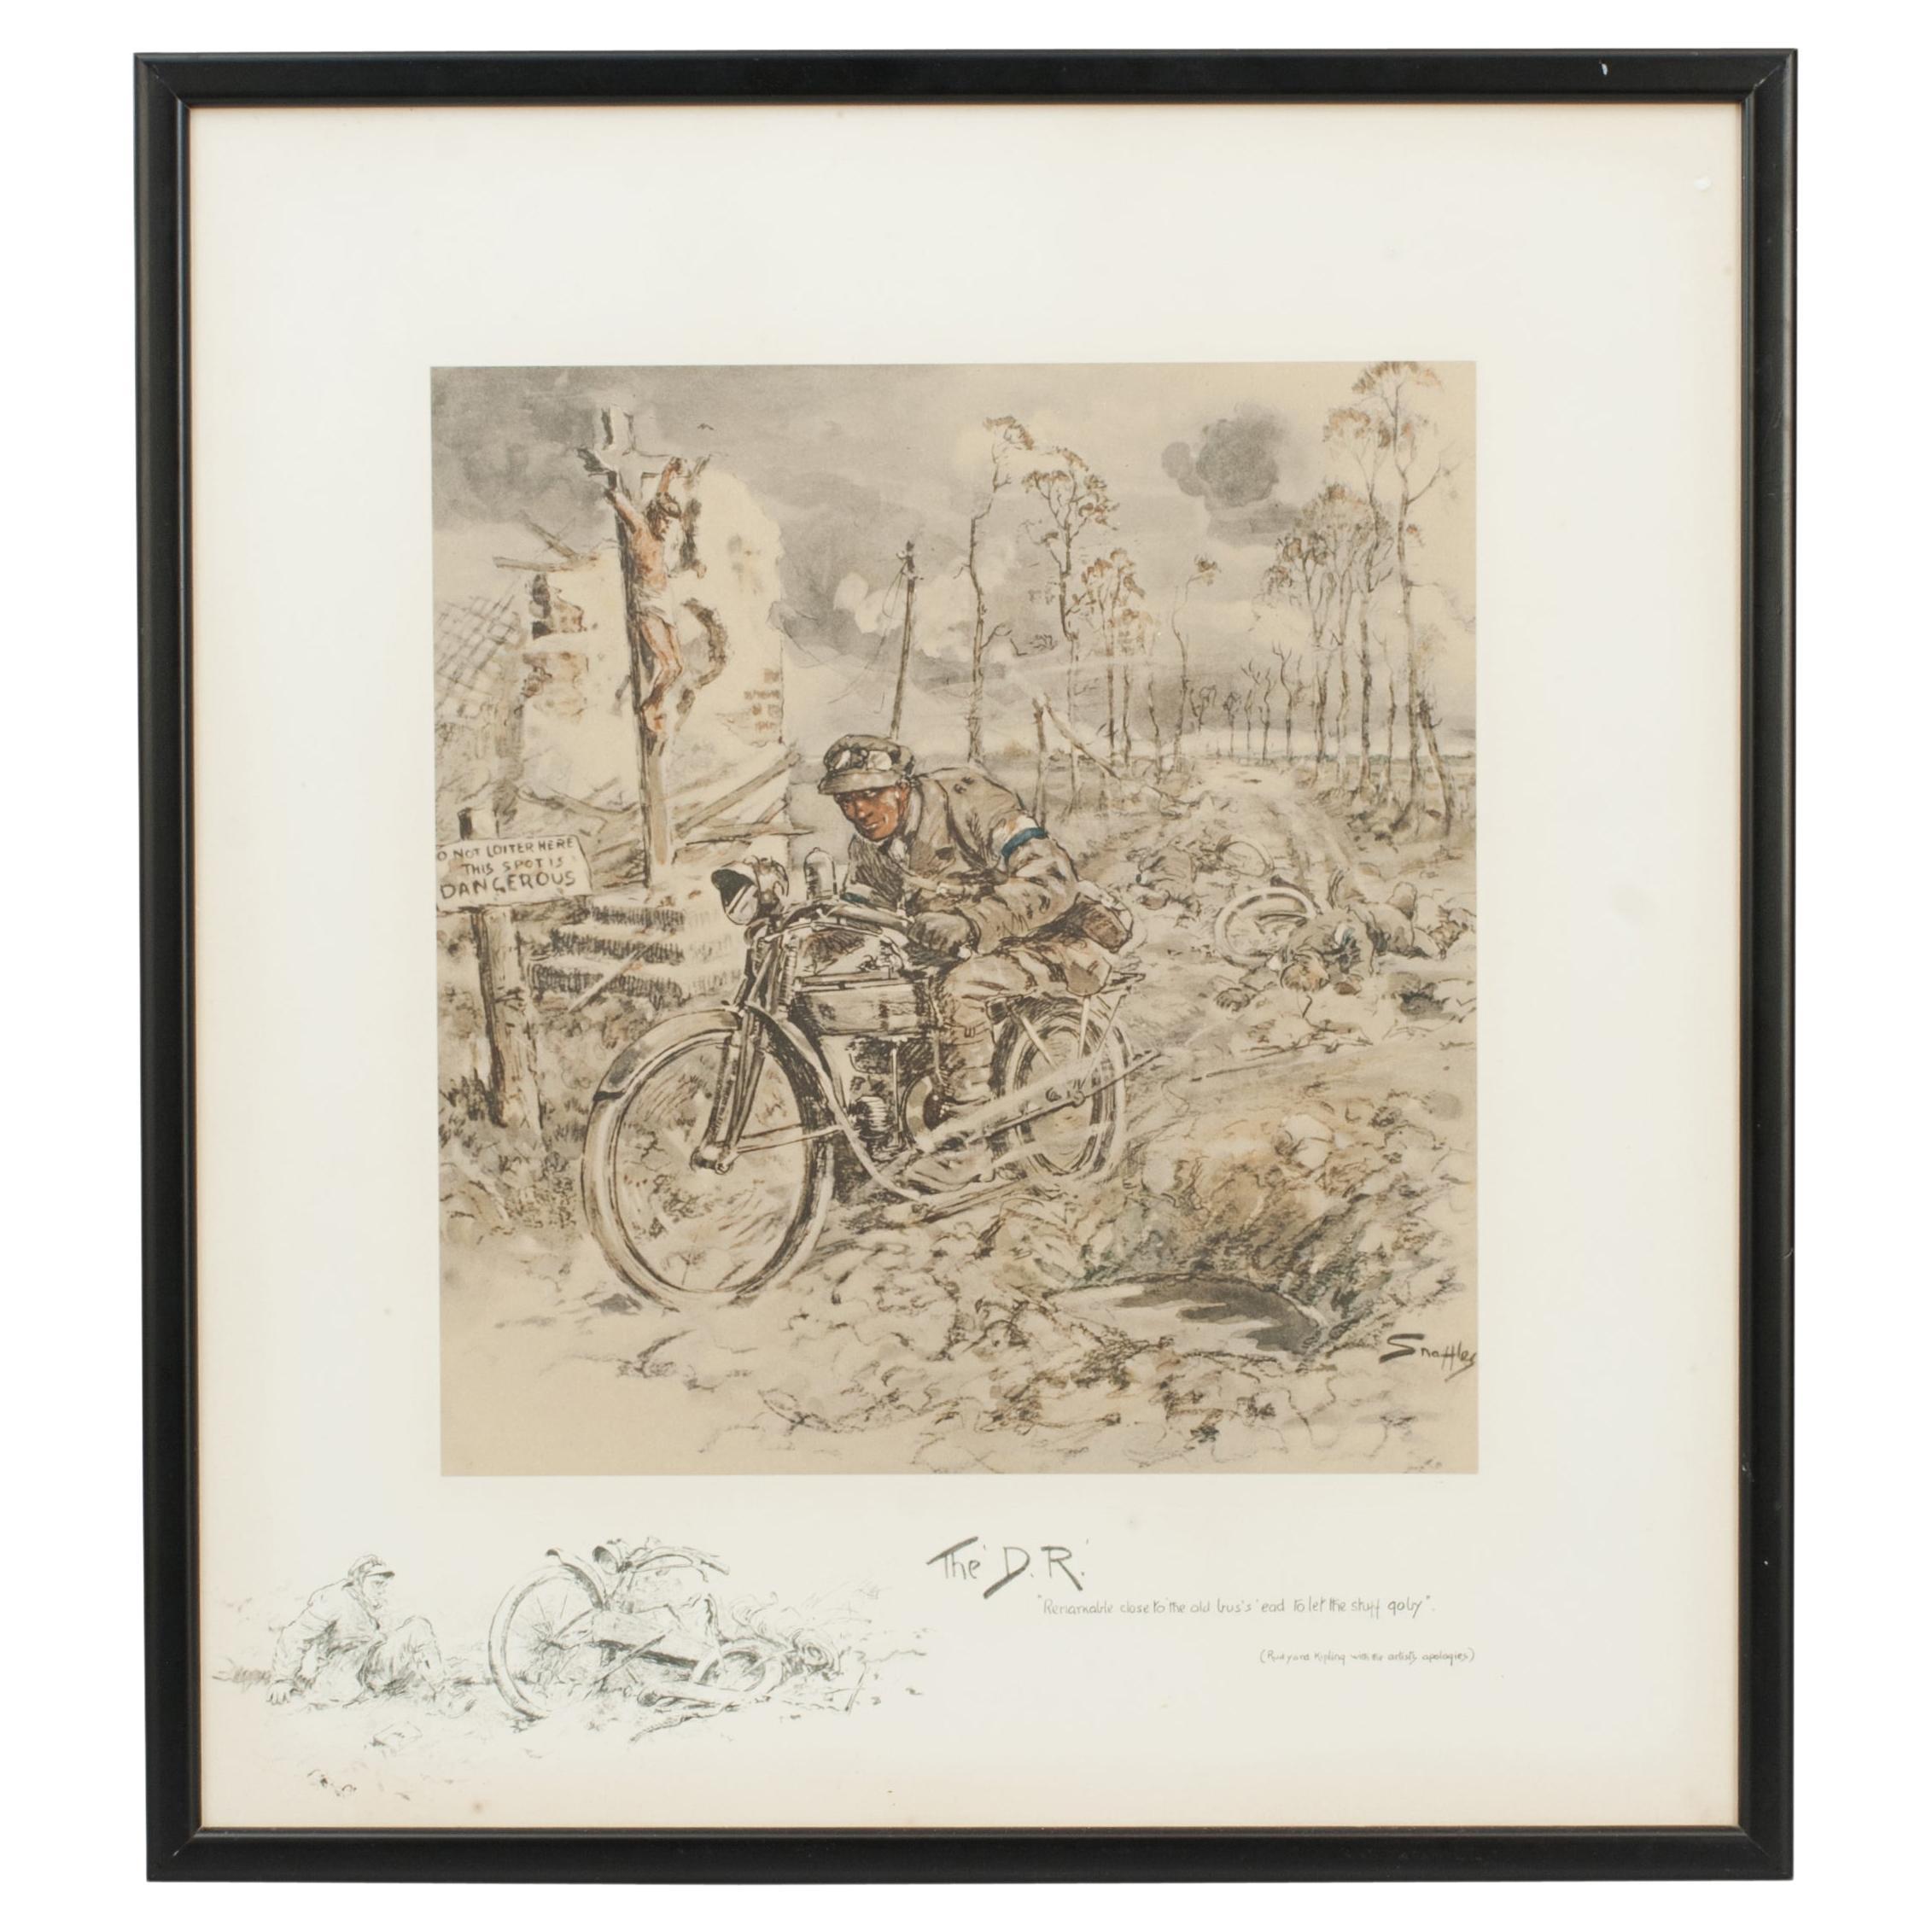 World War 2 Motoring Print, Snaffles Lithograph, "the D.R." For Sale